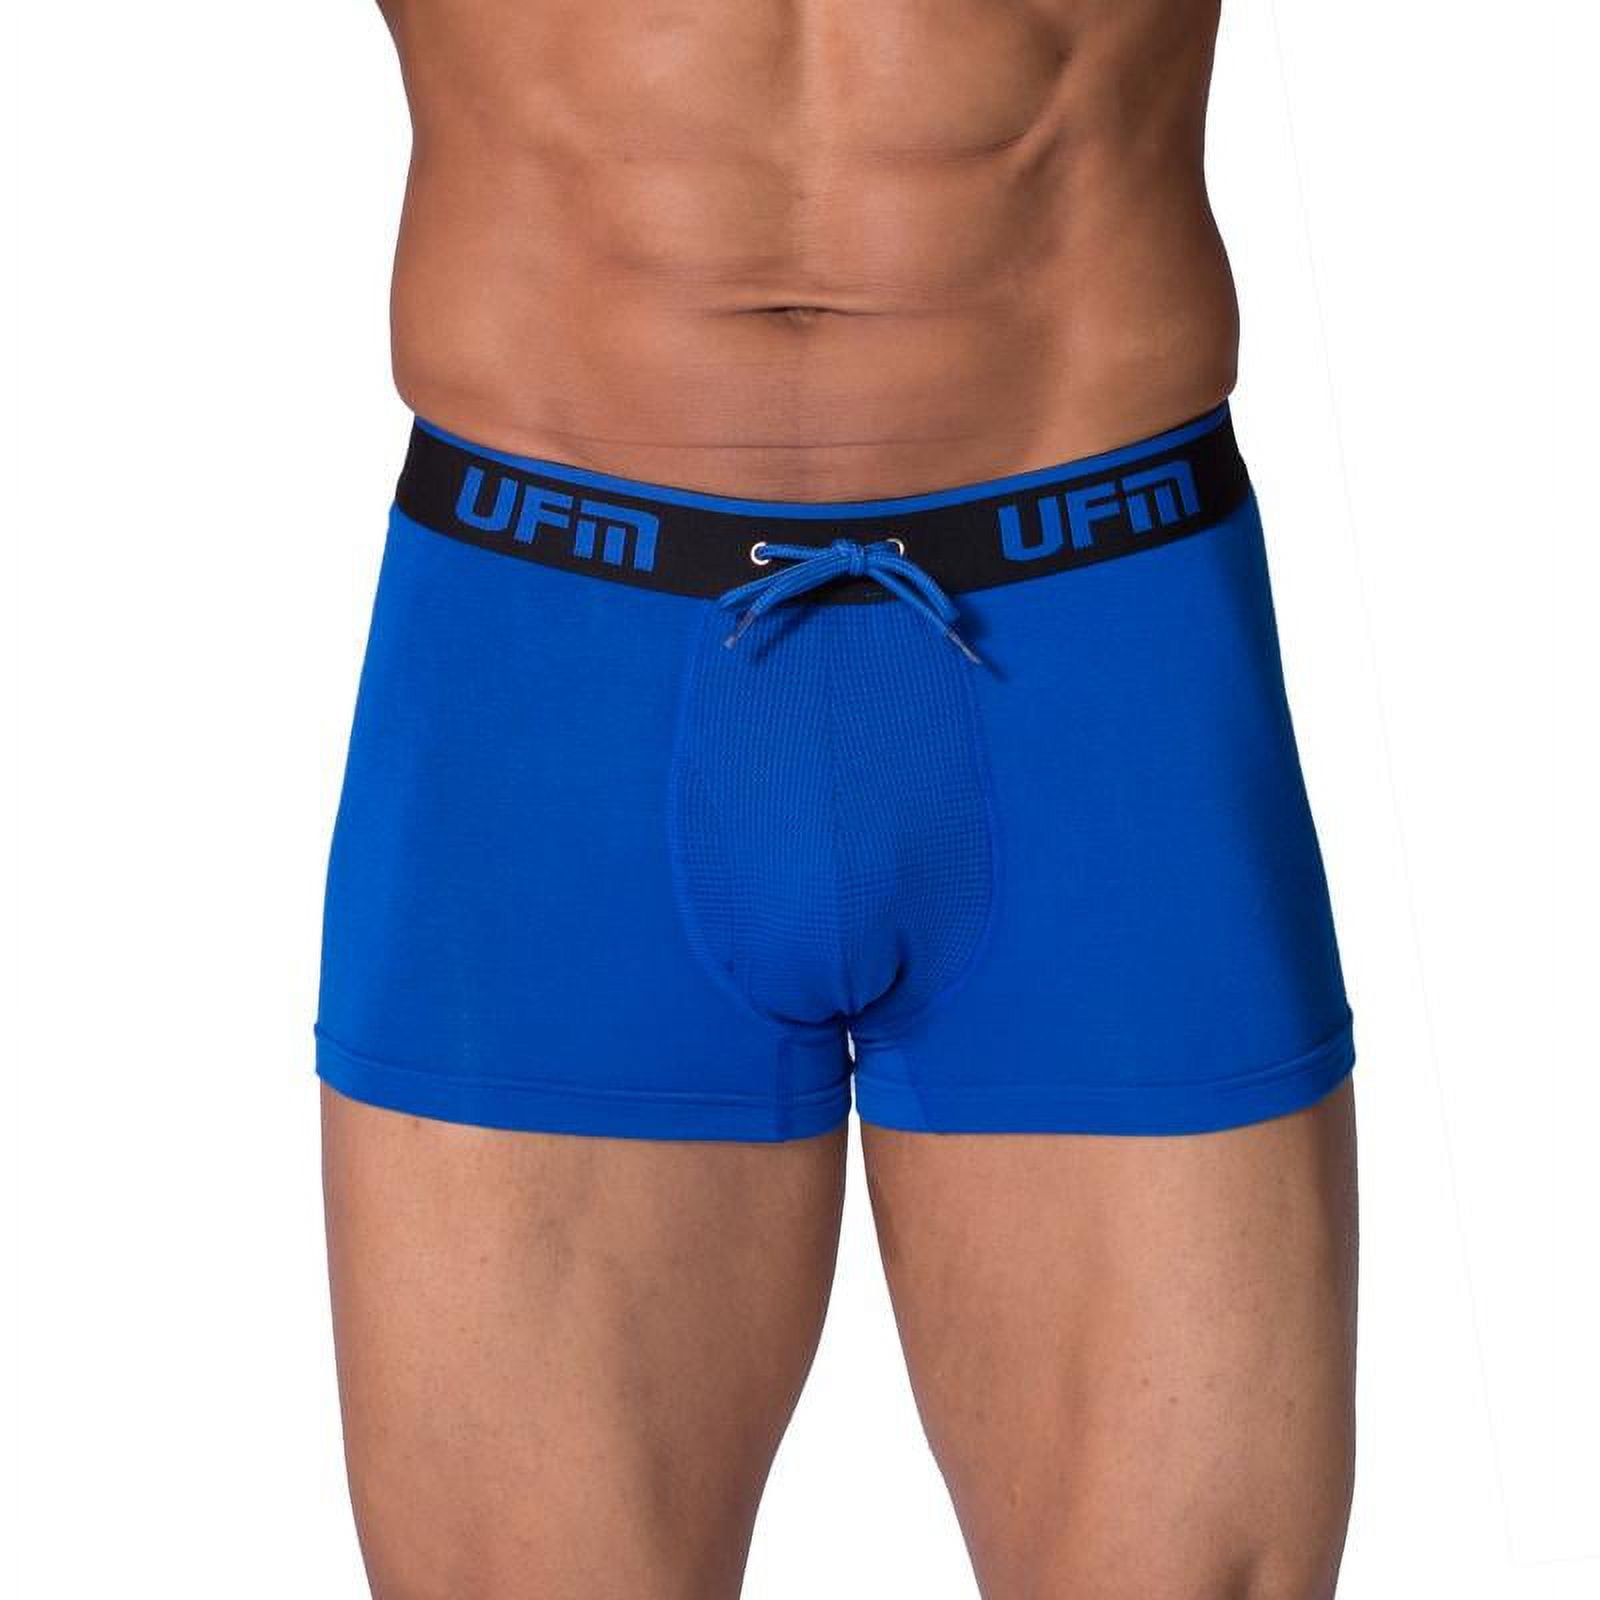 UFM Men's Polyester Trunk w/Patented Adjustable Support Pouch Underwear for  Men Royal Blue 54 